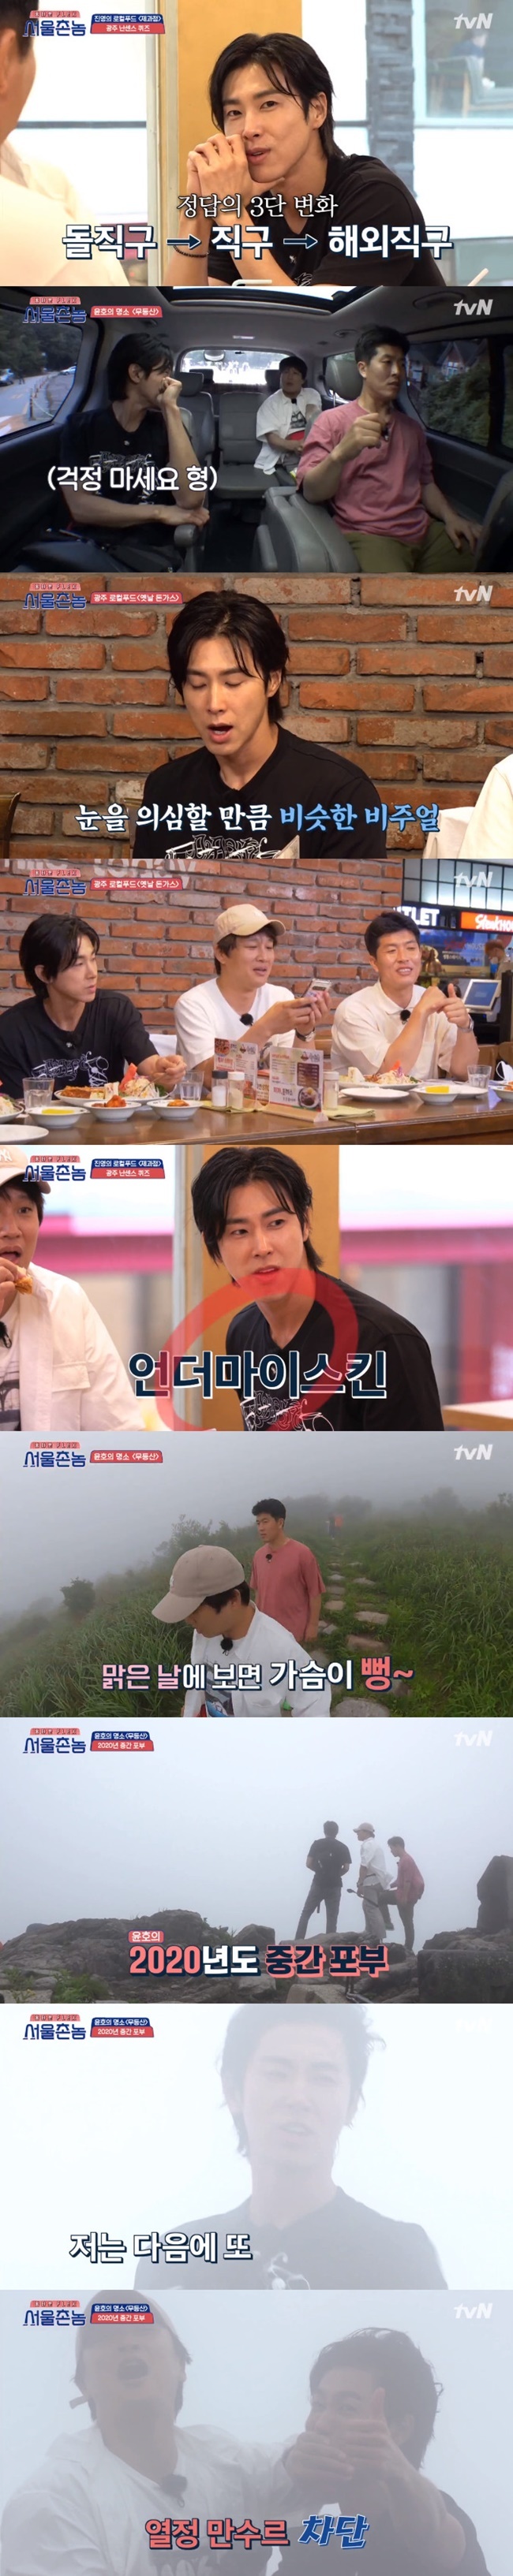 TVXQ Yunho played an active role as a passionate rich man.In the TVN Hometown Flex  episode 4, which was broadcast on August 2, Jeolla-do Gwangju tour was drawn after last week.Yunho selected TVXQ hit song Mirotic to beat Cha Tae-hyun in the BK ship song pride and made the scene into a laughing sea.In Yunhos selection, Cha Tae-hyun said, I also have a second-lane bridge, but Yunho did not give in and showed storm adverbs to destroy everyone.However, Yunhos enthusiasm was 85 points, and he did not exceed Cha Tae-hyun, and Hong Jin-young laughed at Honey night, saying, Its cheap to be right.Yunhos passion continued while he was returning home, while Yunho made a fight-filled statement saying, Its the beginning now, and went on a self-briefing, saying, Lets look back on the day.Hong Jin-young, who saw the tireless Yunho, asked, Who do you use the room with? Lee Seung-gi quickly stepped out, saying, I am not.In the end, Lee Seung-gi was the person who shared the room with Yunho, and Lee Seung-gi begged, I like all the good things, lets do all the good stories here.Yunho, who led Hometown Flex  Cha Tae-hyun and Lee Seung-gi as Gwangju restaurants, also released a collection of memories.Kim Byung-hyun, Hong Jin-young, and Yunho gathered their mouths and visited the Dongas restaurant, which was named as a restaurant for Chungjangro, and said, This house is a real big hit.In particular, the place was also a mecca for the meeting. Yunho said, There were a lot of families, but there were a lot of men and women.If you have someone you like, you left the note and it was.Hong Jin-young said, I did not do it, but what always came, and Yunho recalled memories that the camp actually heard the rumors here.Yunho peaked with a passion rich man on the Mudeungsan tour; the members were based on an ambitious Mudeungsan mountaineering plan; yet, he said, this unity is good.We are now a team, he laughed brightly and laughed.Eventually, the members played a game game against Yunho for Kaldeung, and Kim Byung-hyun and Cha Tae-hyun were together in Mudeungsan.Yunho, in the foggy Mudeungsan, said: Im sorry, I should have my heart open when I saw the original panoramic view.I tried to finish it by shouting aspirations in 2020. 